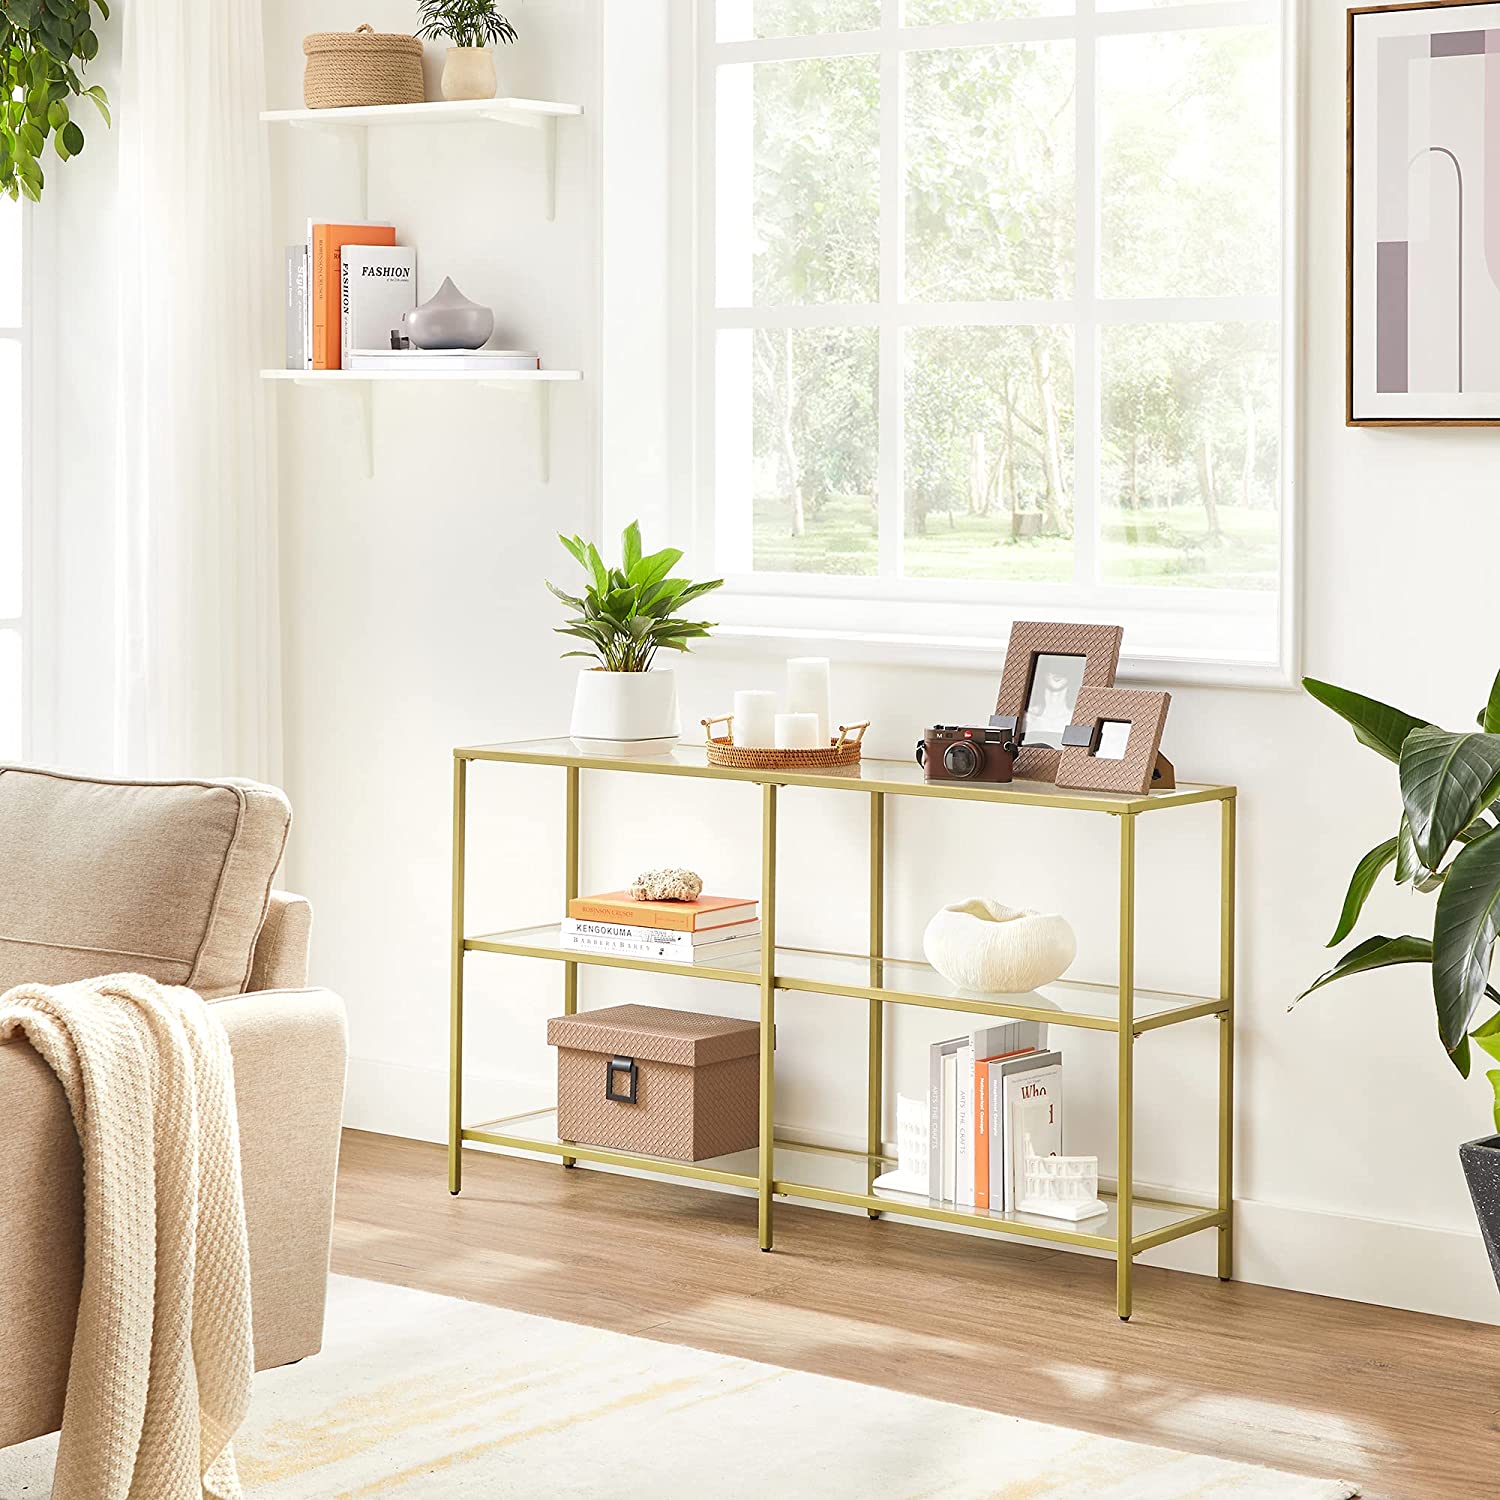 Nancy's Granada Console Table - Sidetable - 3 Levels - Tempered Glass - Metal - Gold - 30 x 130 x 73 cm